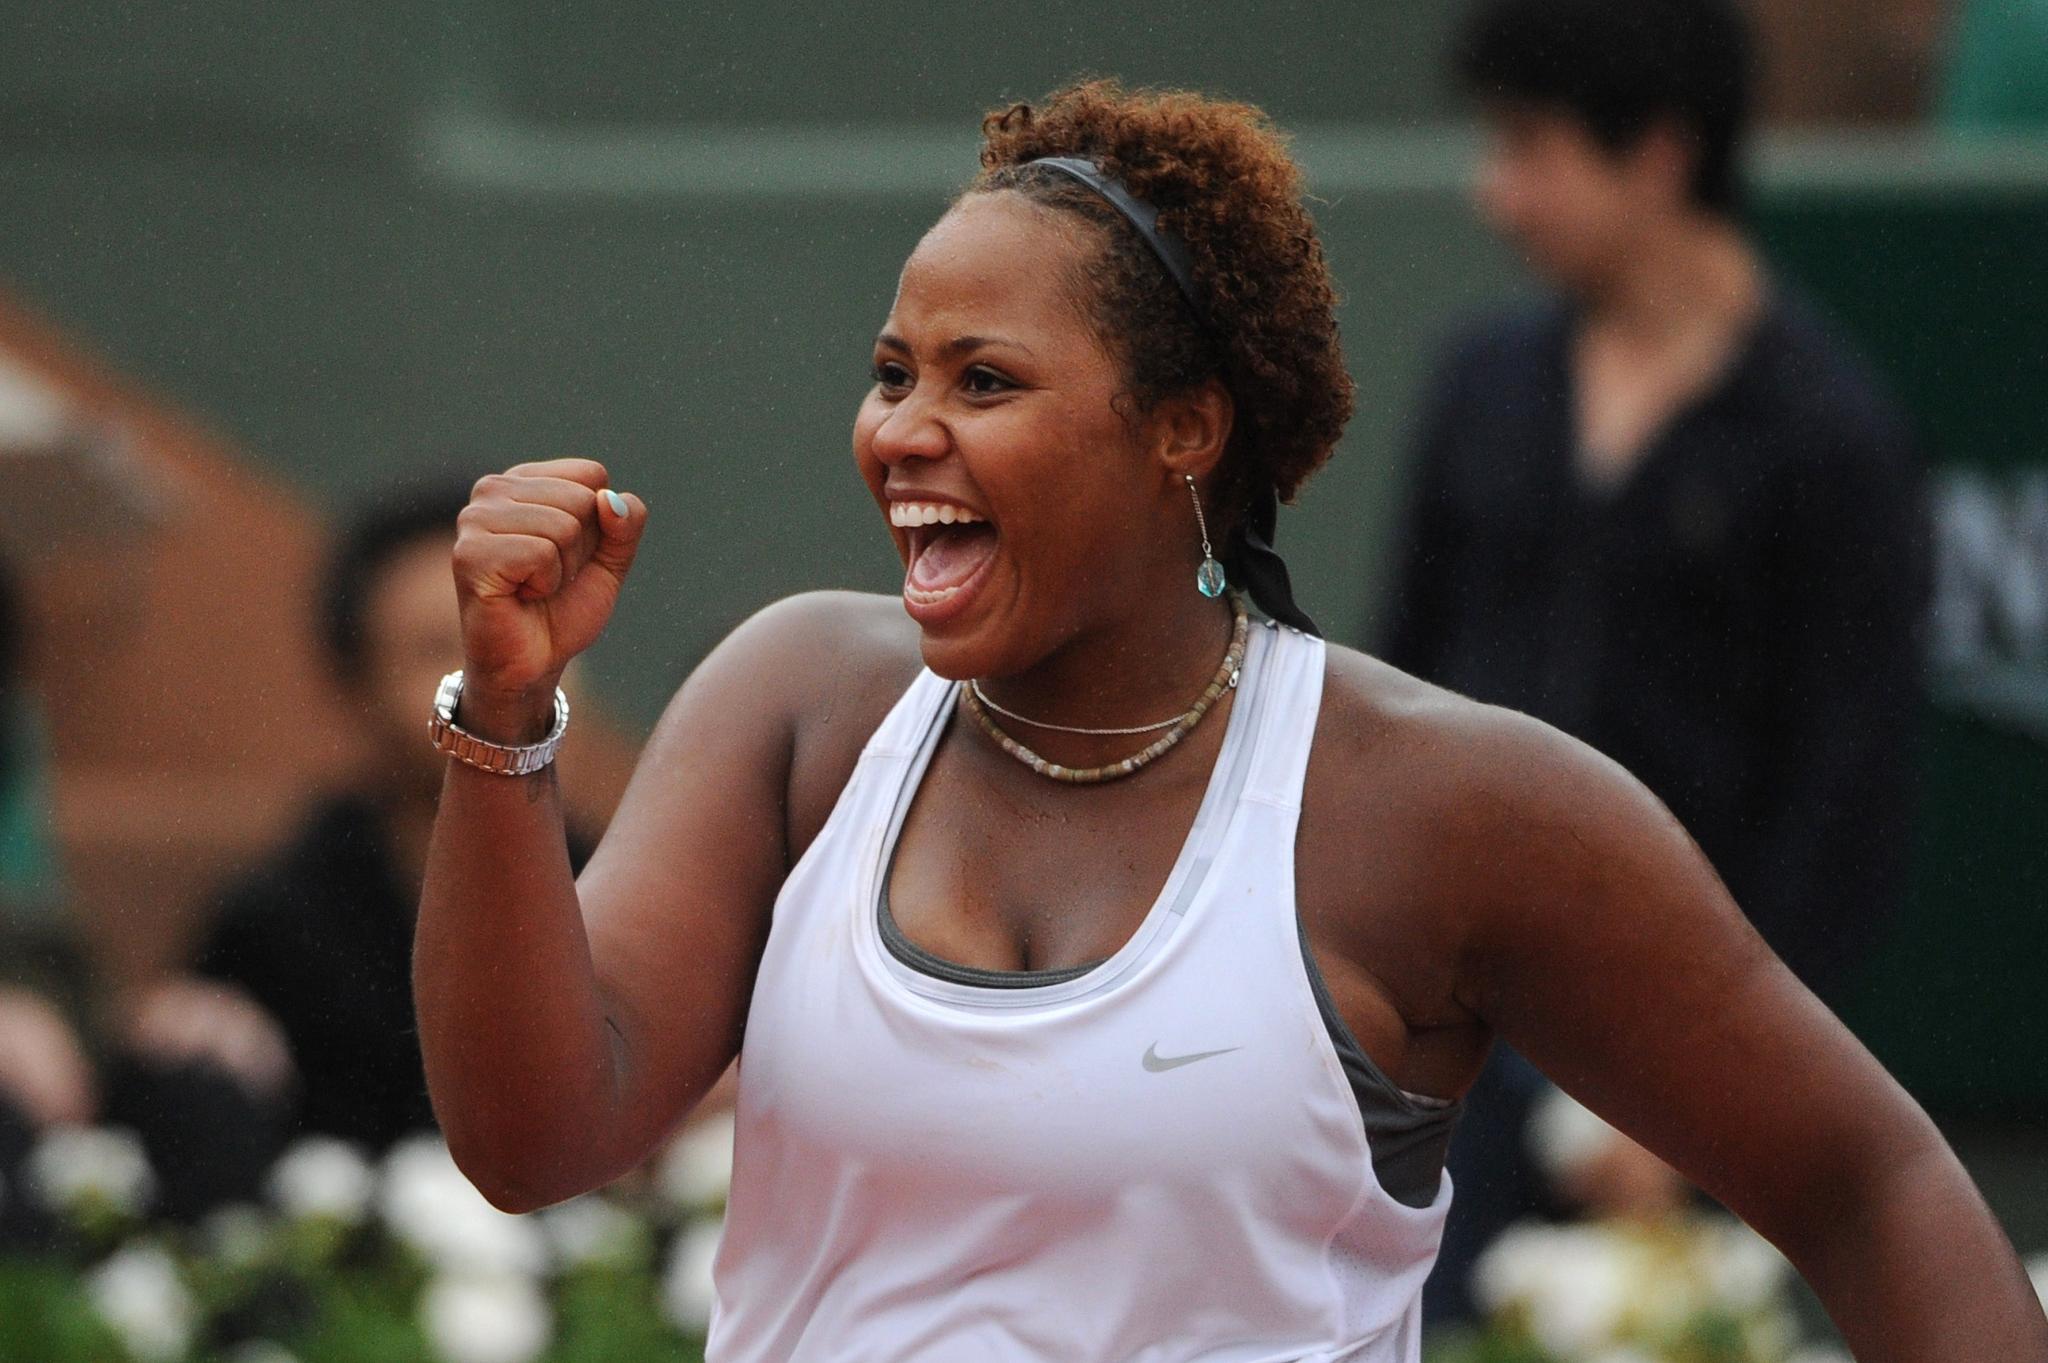 Chicago Teen Taylor Townsend Has Impressive Run At French Open